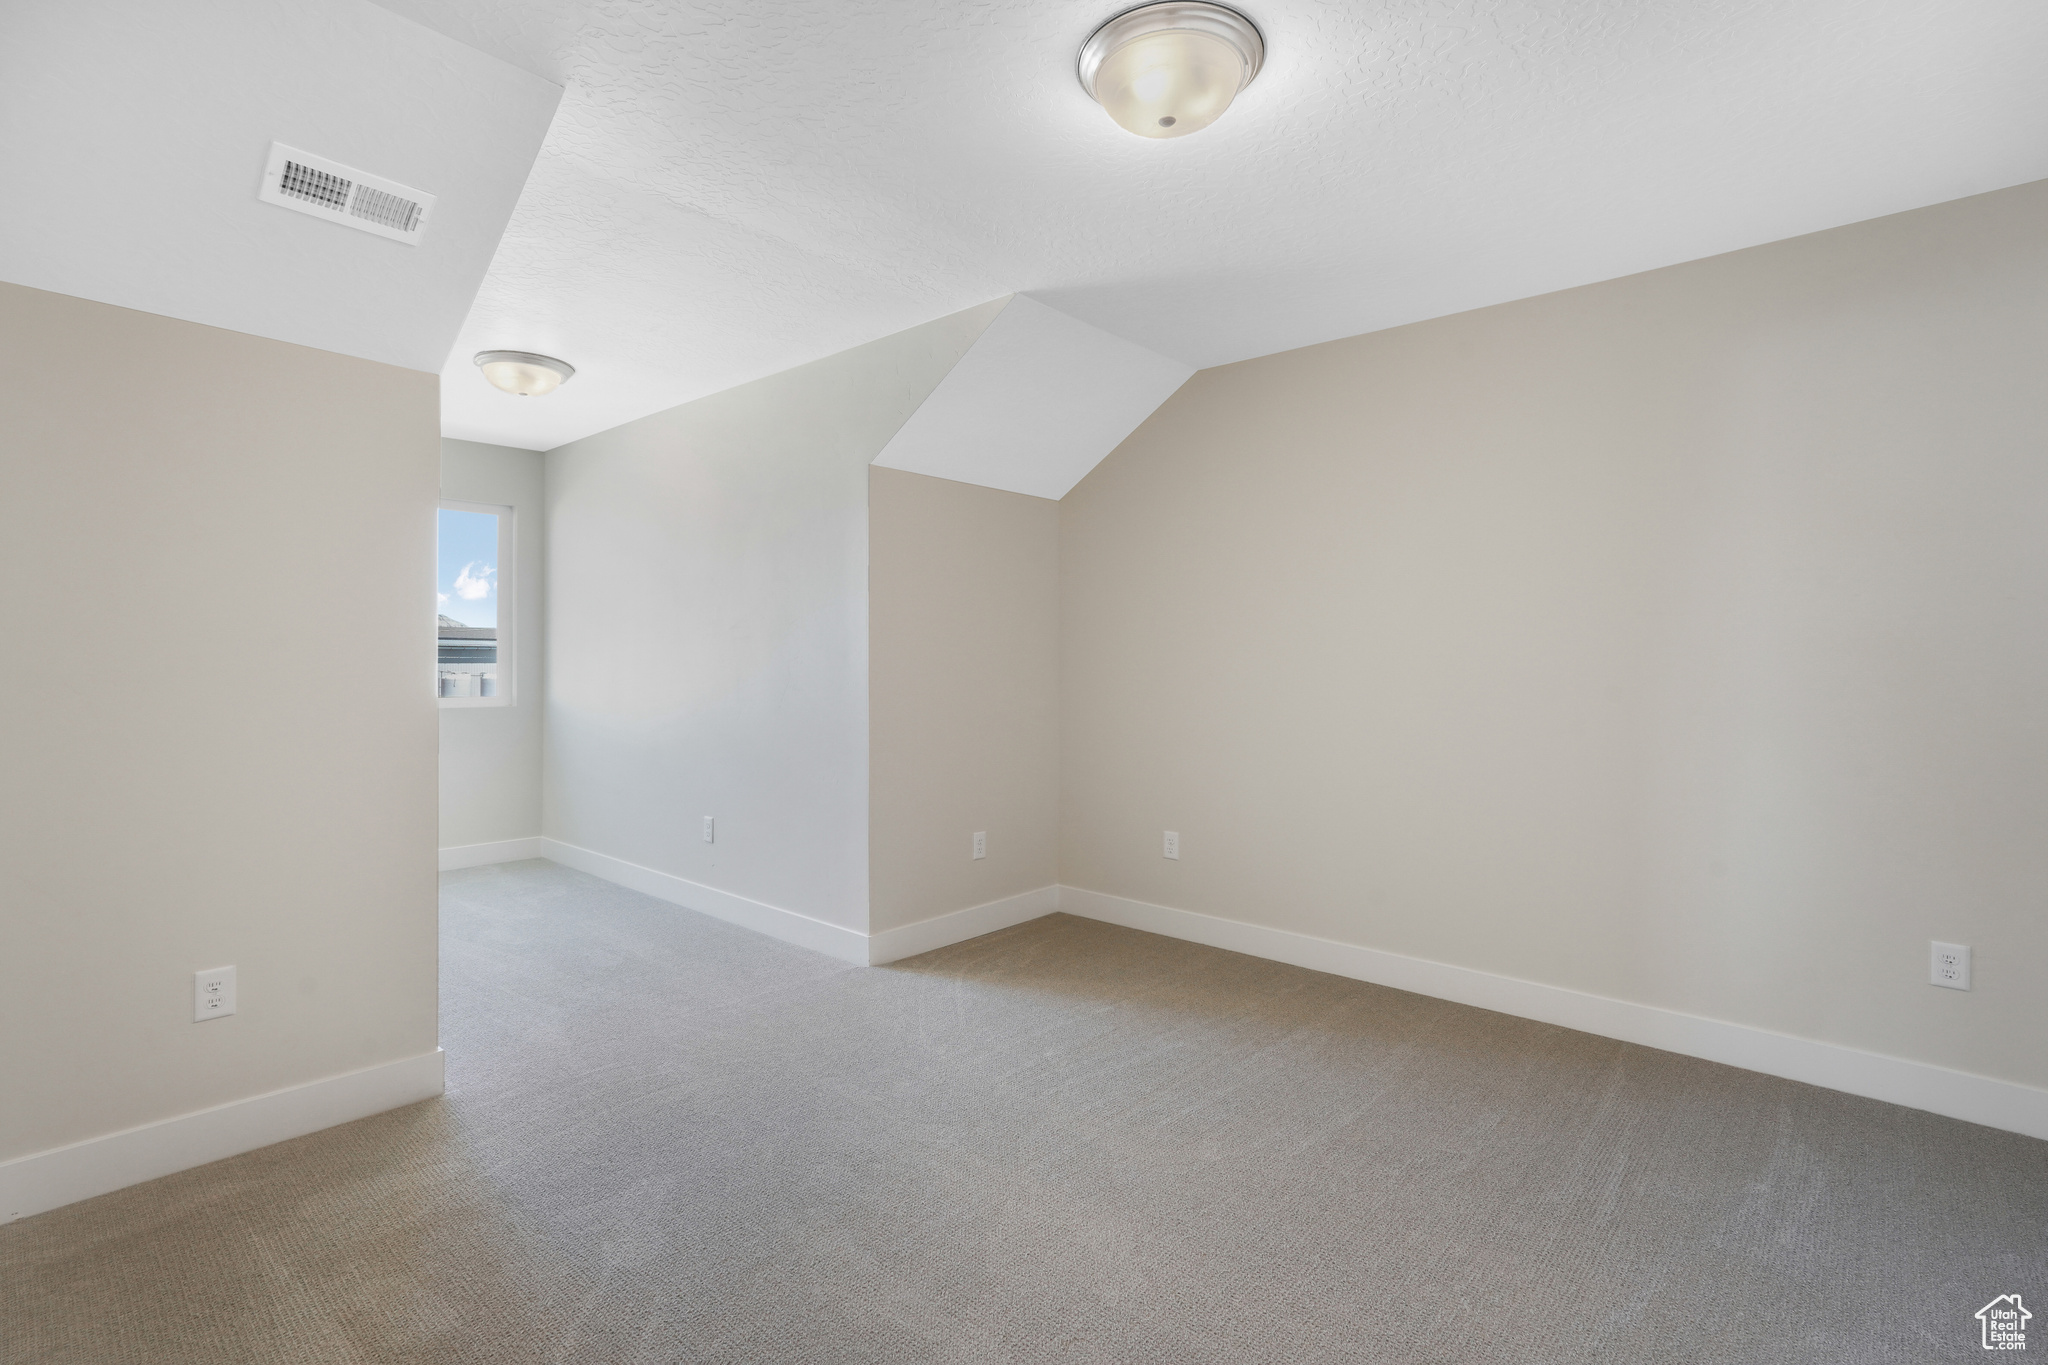 Additional living space with light carpet